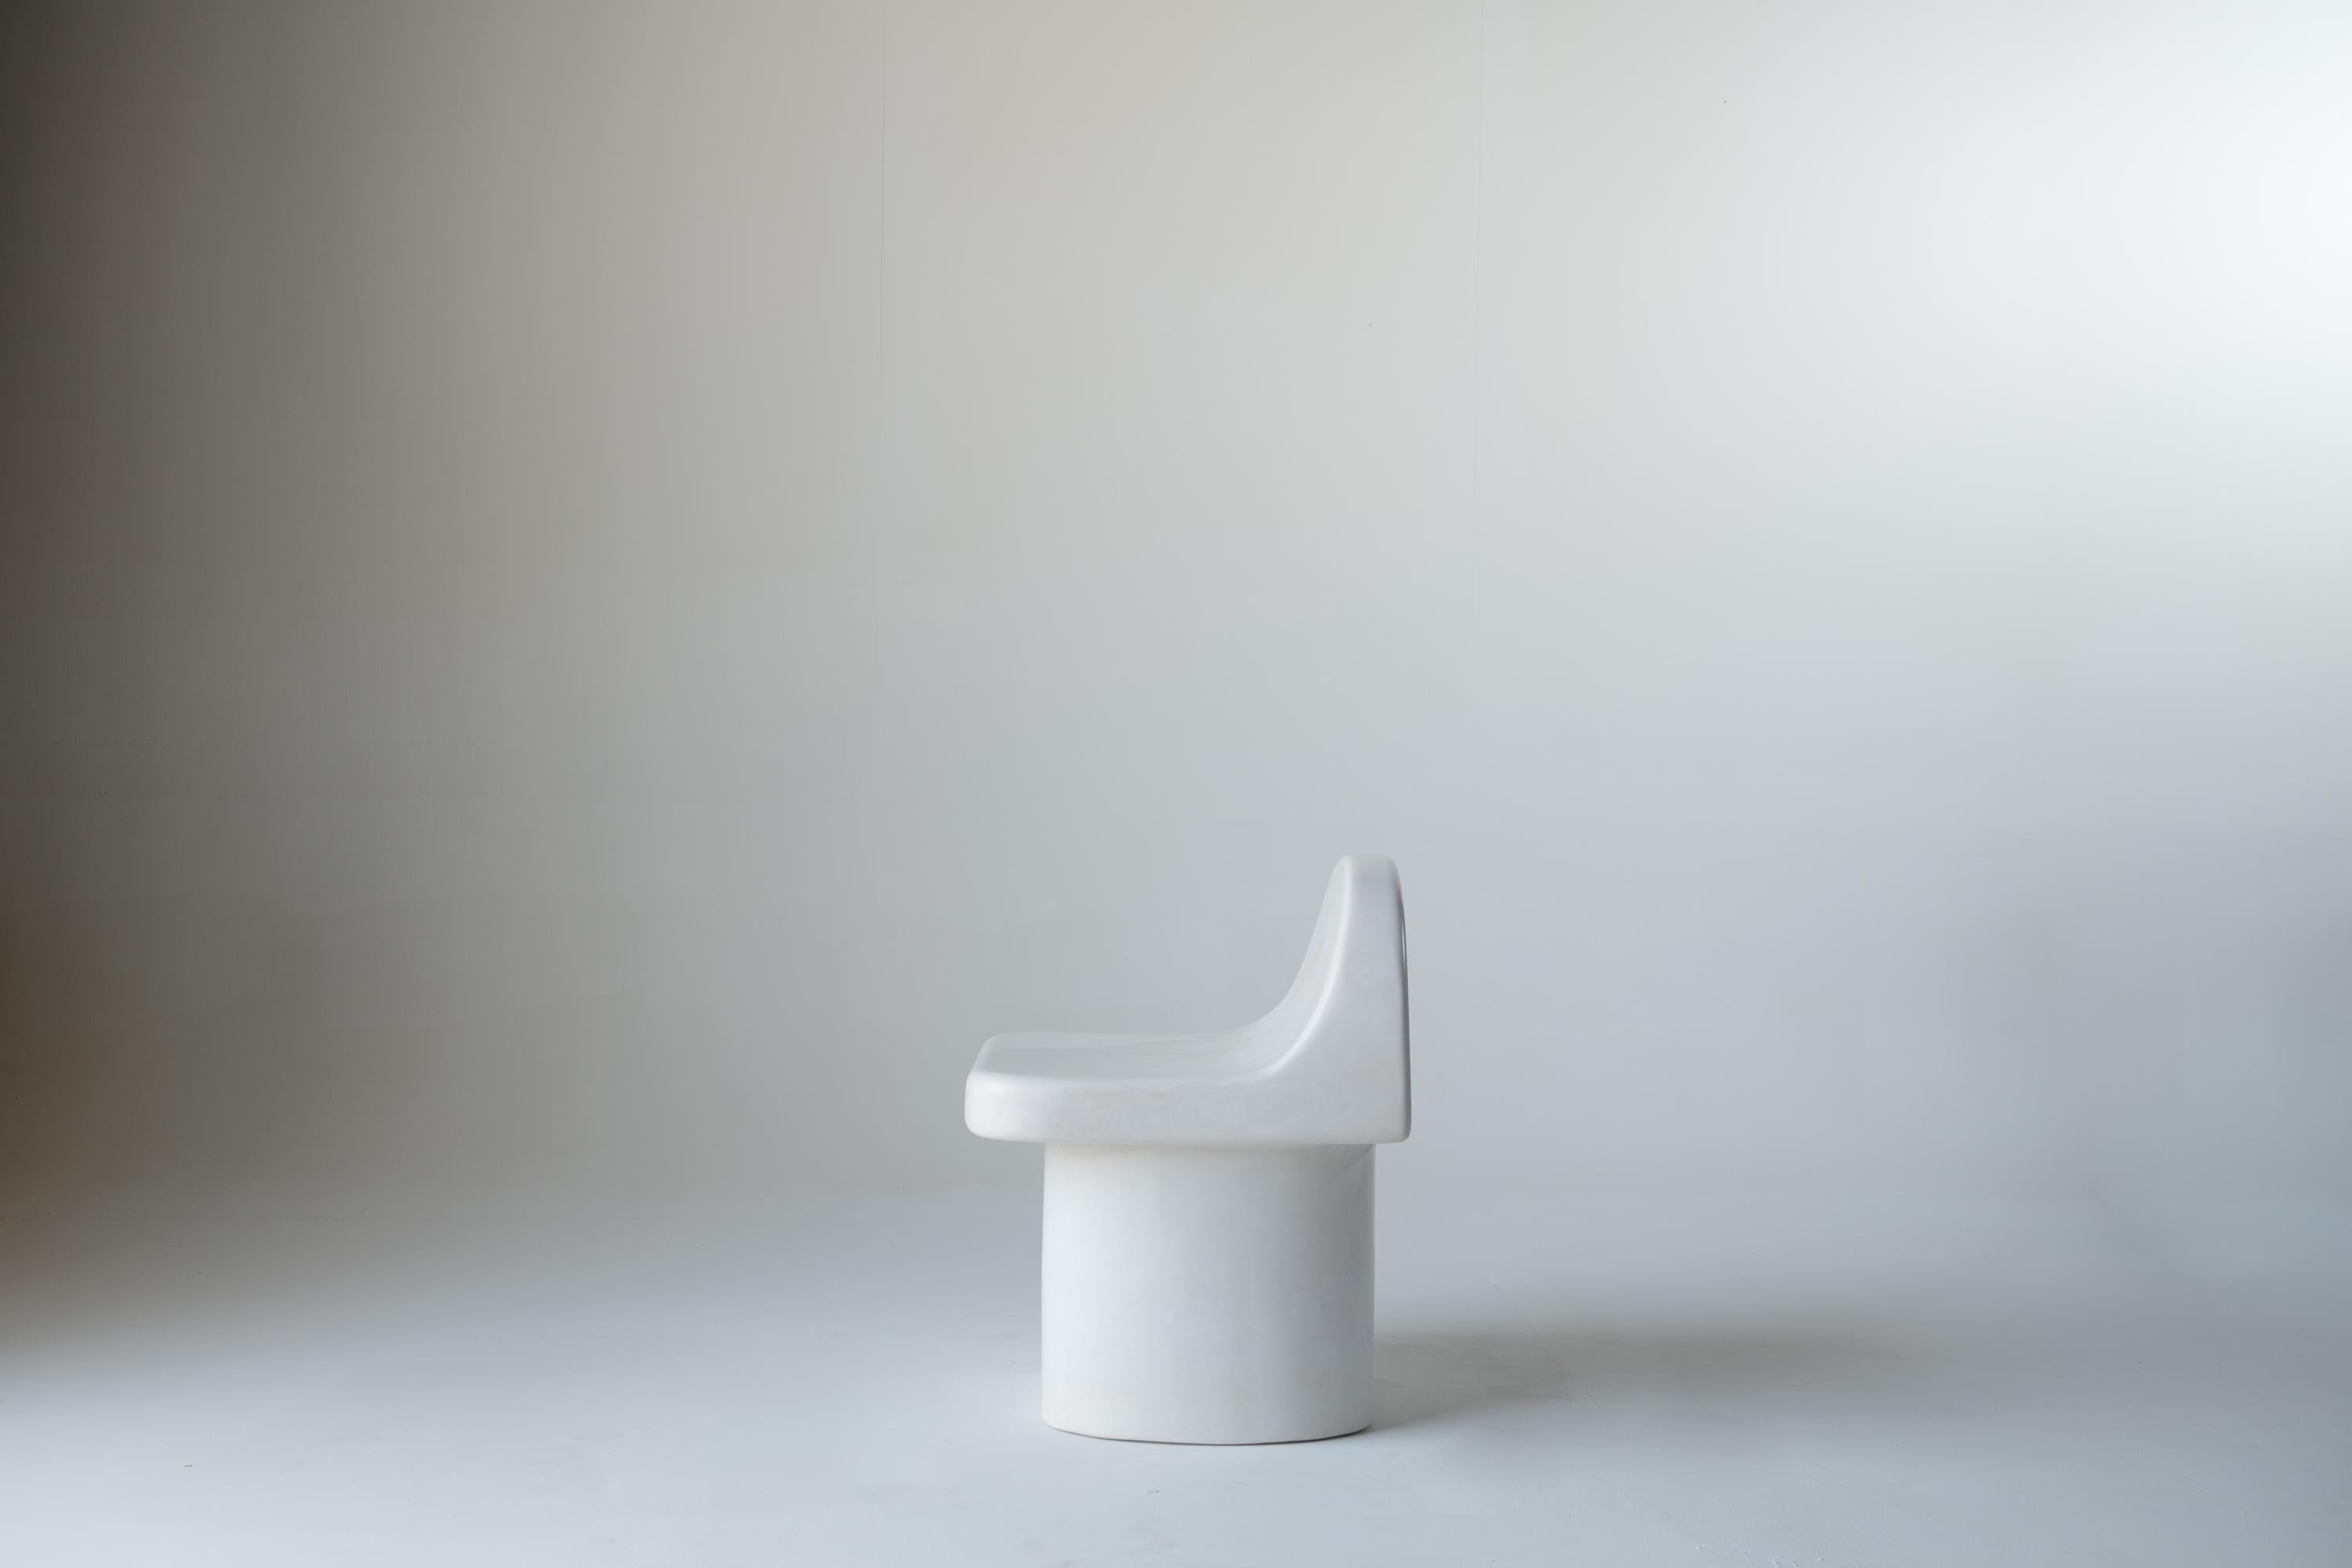 Le Champignon is hand carved from gypsum plaster, then polished and stained to give the surface a smooth and pleasing quality. Created by Reynold Rodriguez's design studio in San Juan, PR.